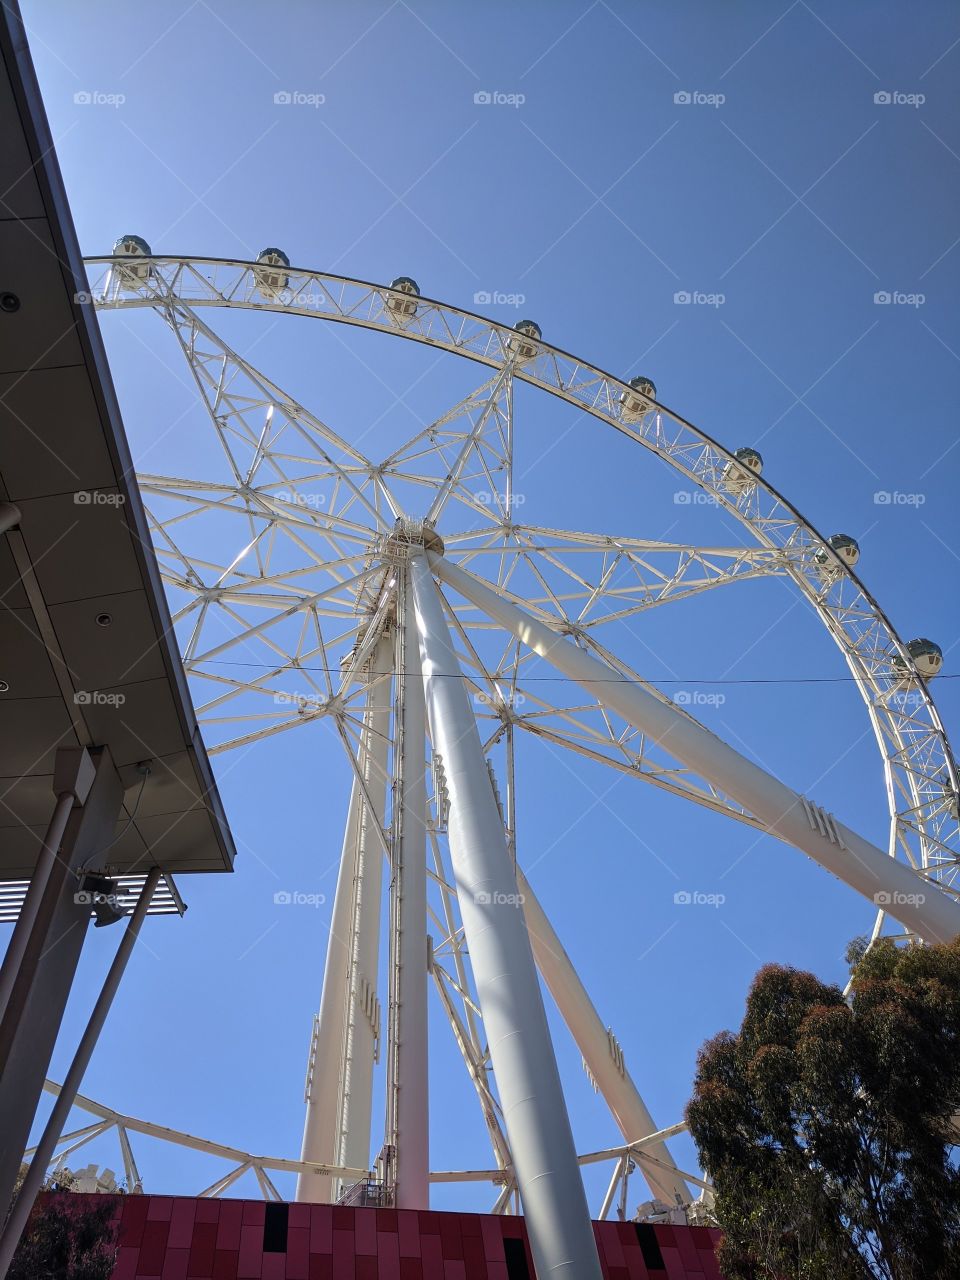 The big wheel for sightseeing